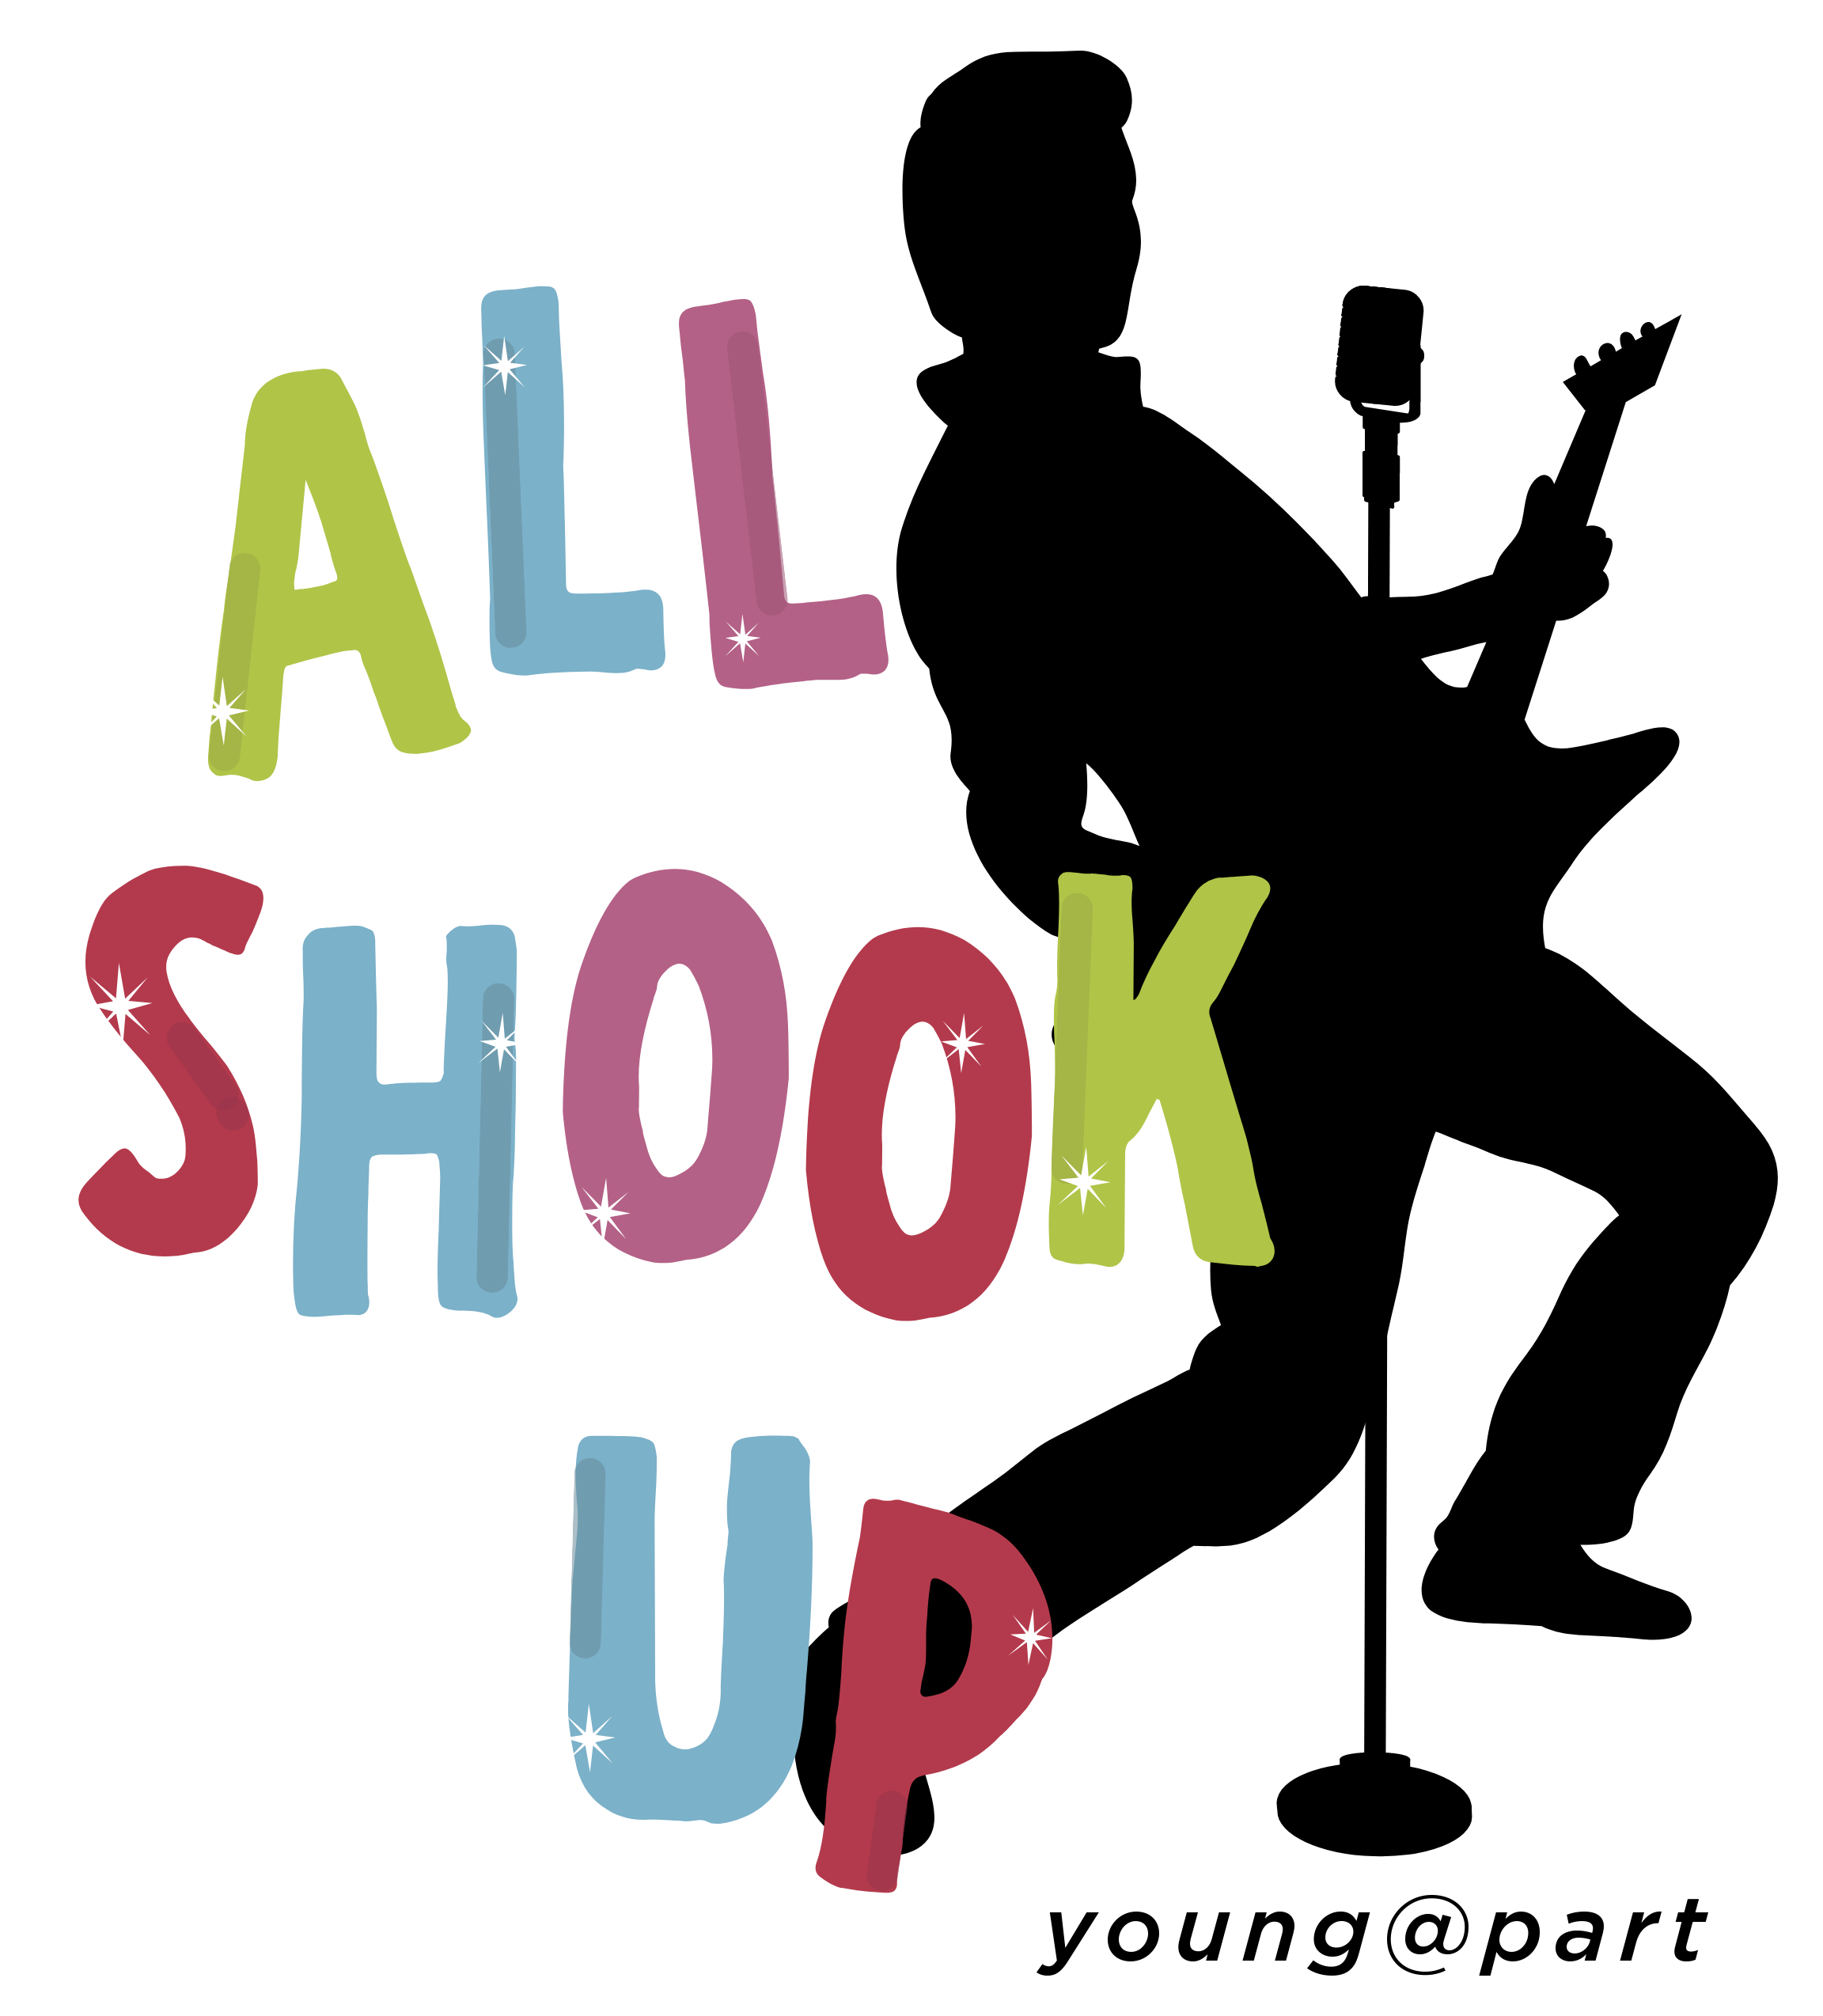 All Shook Up YAP Plano